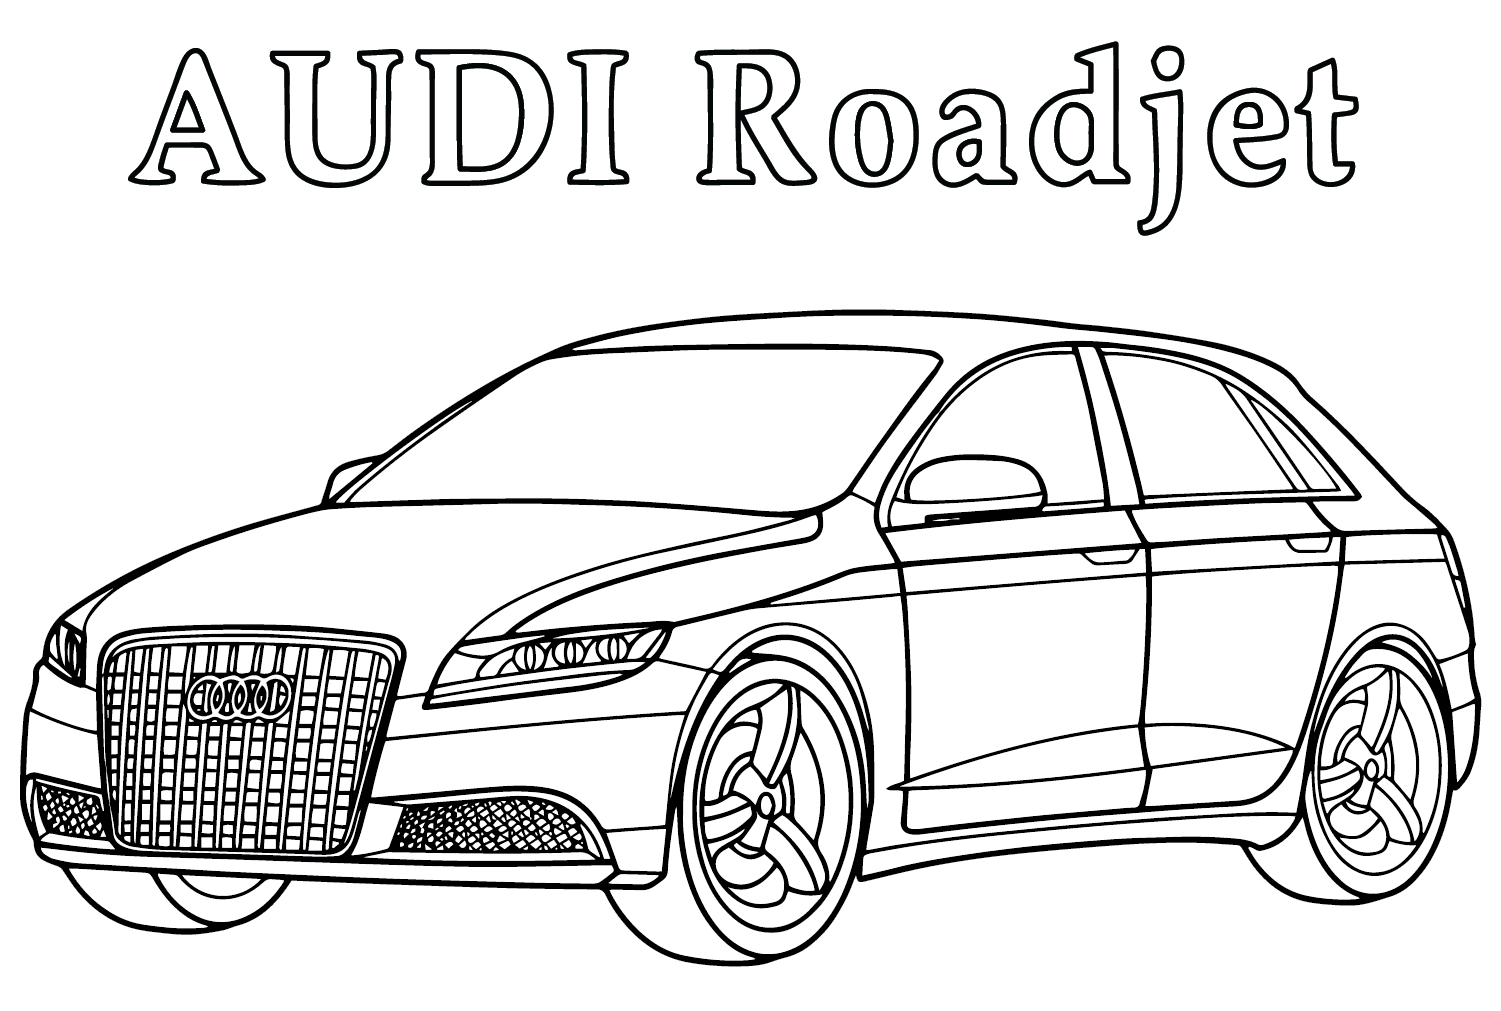 Audi Roadjet Coloring Page from Audi